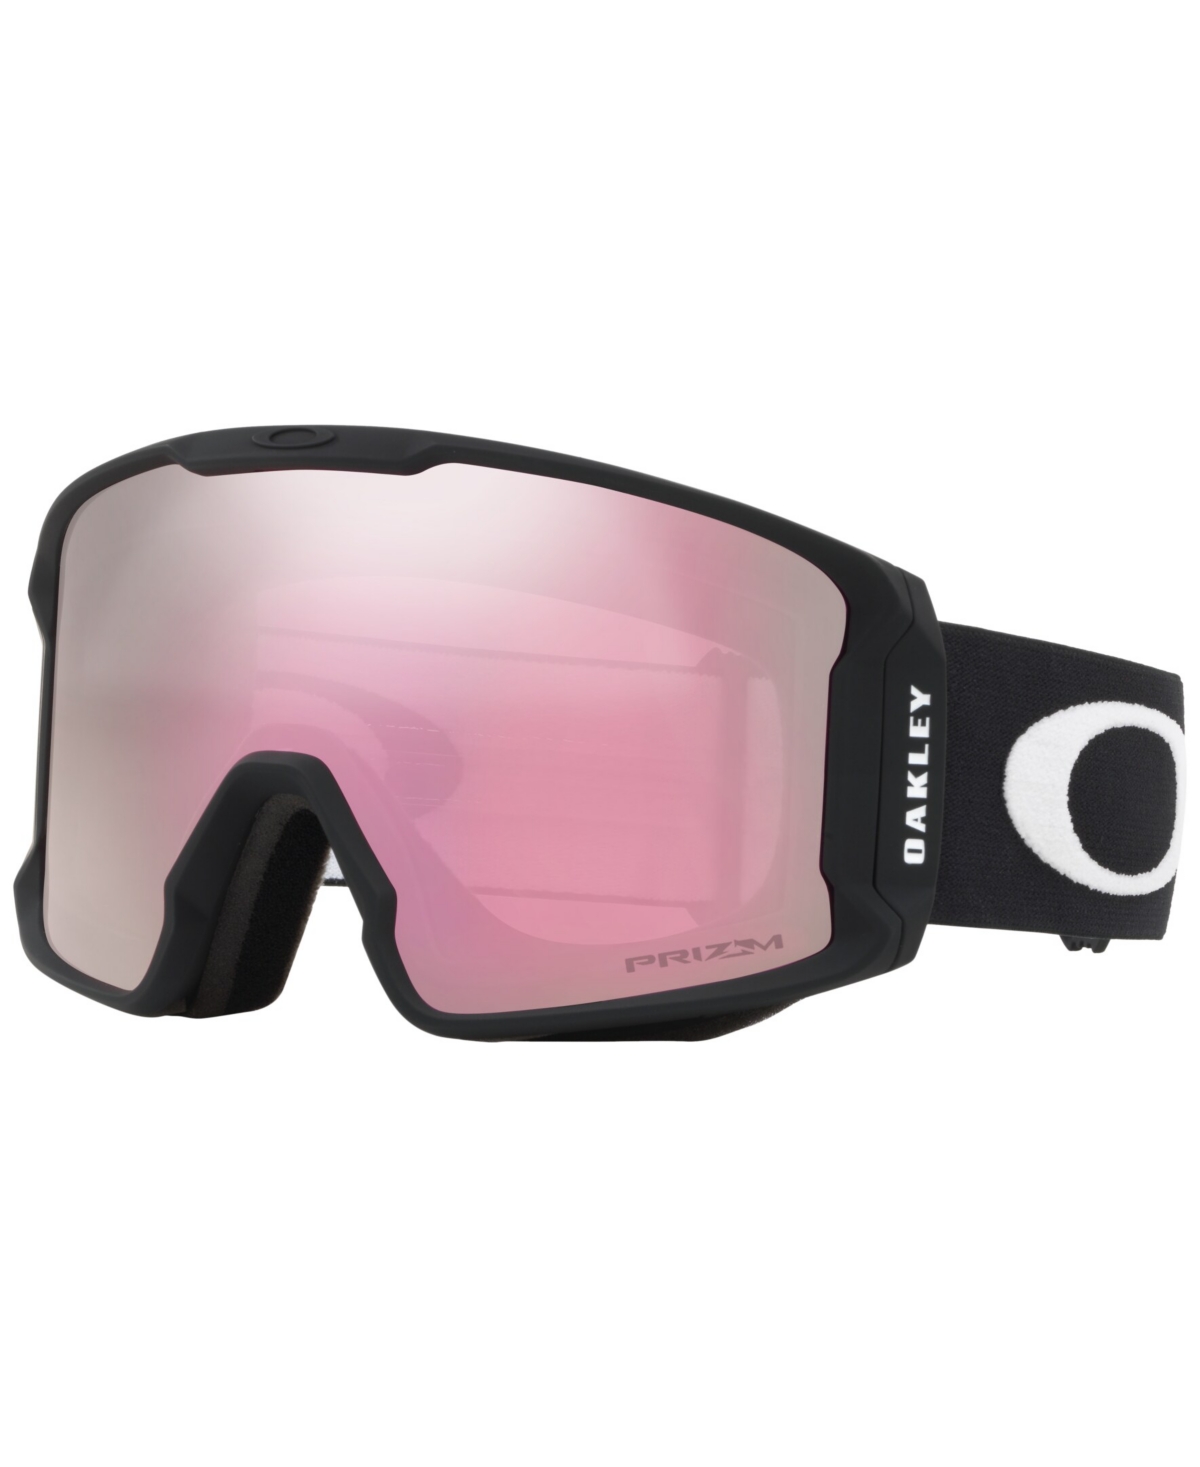 OAKLEY UNISEX LINE MINER L SNOW GOGGLES, OO7070-06